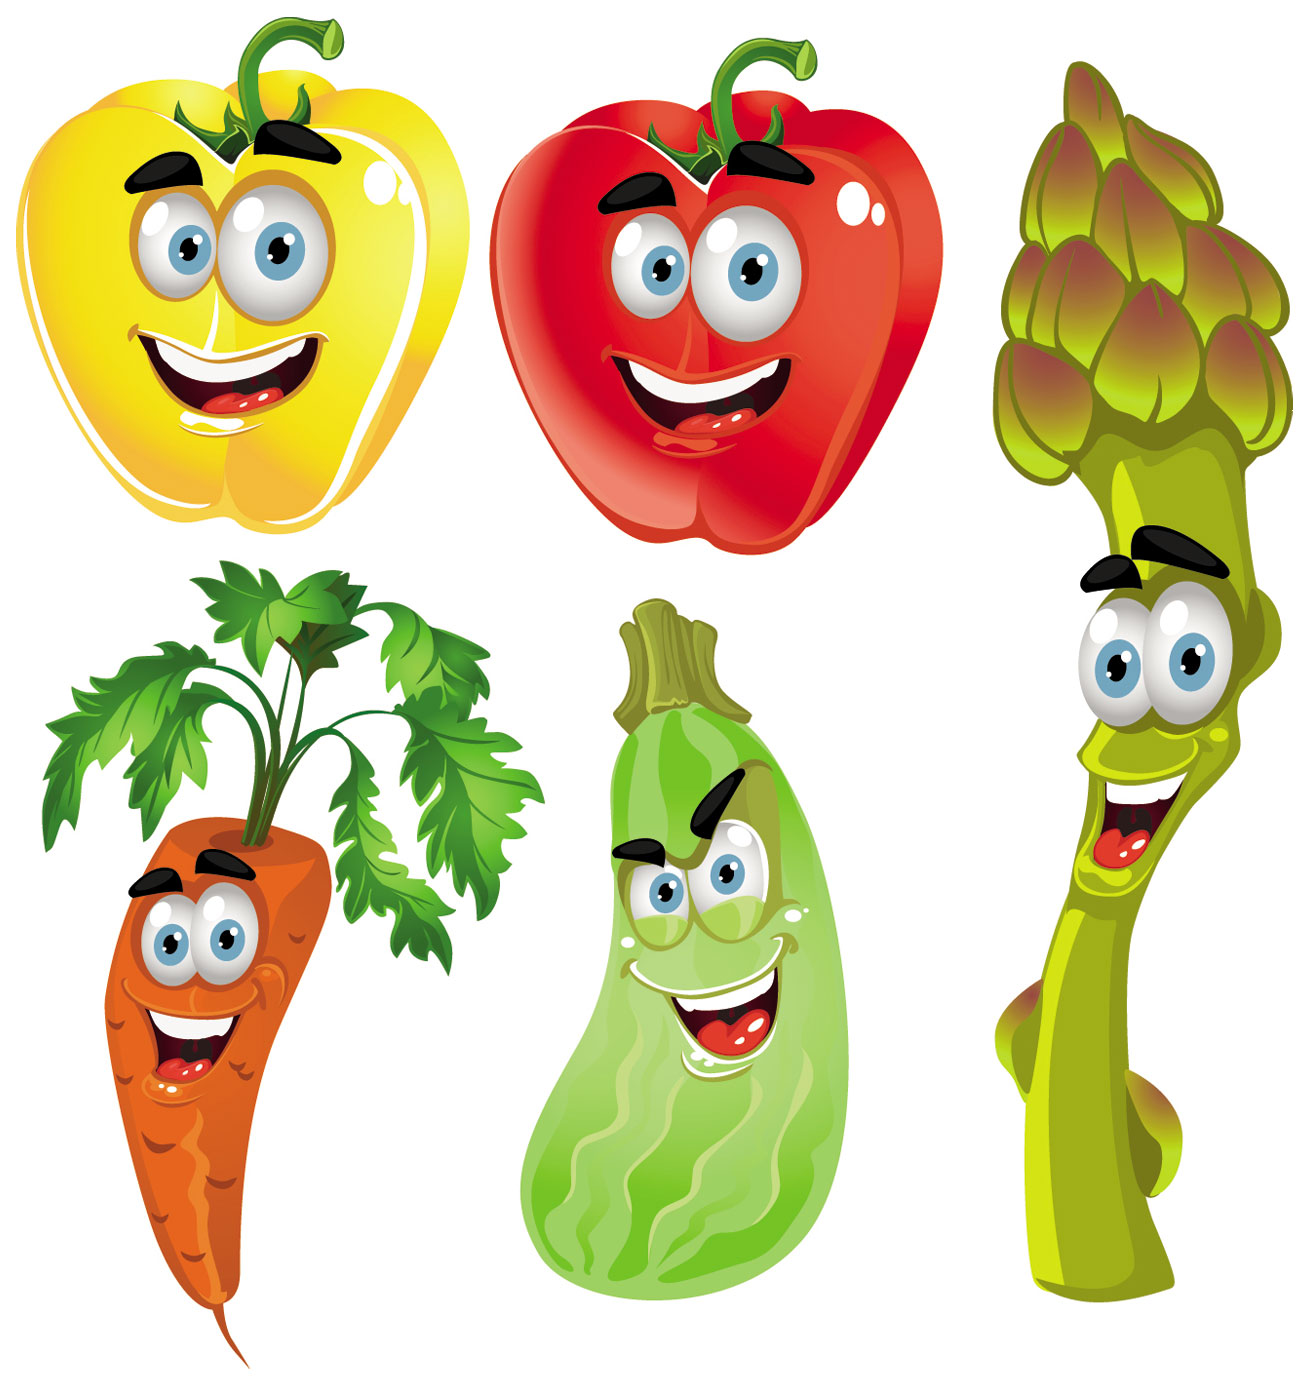 10 Cartoon Fruits And Vegetables   Free Cliparts That You Can Download    